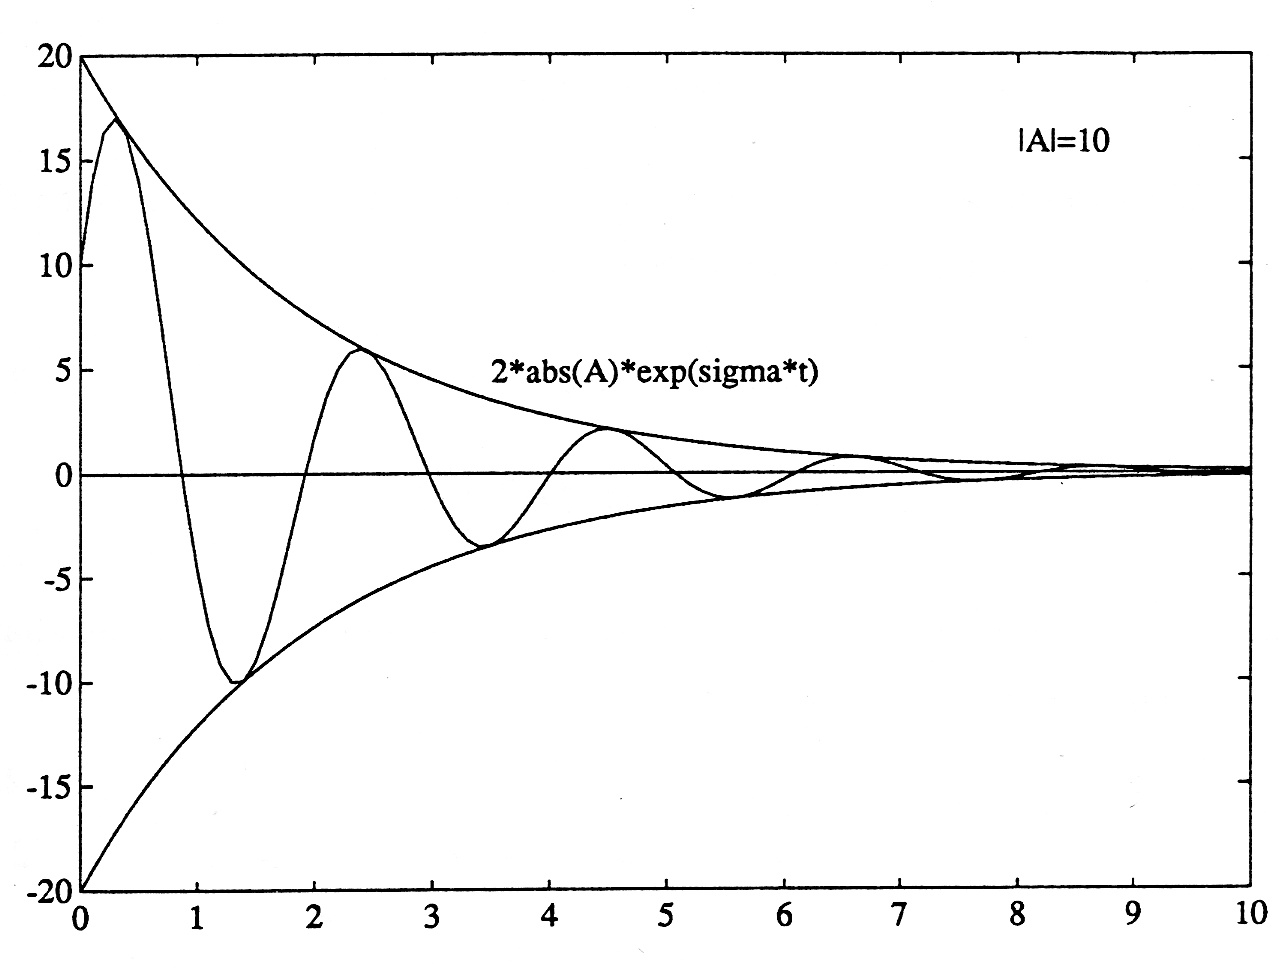 Figure one is a graph with unlabeled axes, with the horizontal axis  ranging in value from 0 to 10 in increments of one, and the vertical axis ranging in value from -20 to 20 in increments of 5. There are three curves on this graph. The first begins at the upper-left corner of the graph, at (0, 20), and is drawn decreasing from left to right at a decreasing rate, until, by (8, 0) it is nearly indiscernible from the horizontal axis, where it continues and terminates at (10, 0). The second curve is a mirror image of the first across the horizontal axis, beginning in the lower-left corner of the graph and continuing to the right until it is horizontal along the axis. The third curve seems to follow a wave-like pattern that is bound by the two curves above and below. The curve begins at (0, 10) and starts in a positive direction, then moves right with five peaks and troughs to the right until it is nearly a horizontal line by the far right of the graph. Along these graphs is an expression that reads 2*abs(A)*exp(sigma*t), and the entire graph has a small label that reads |A|=10